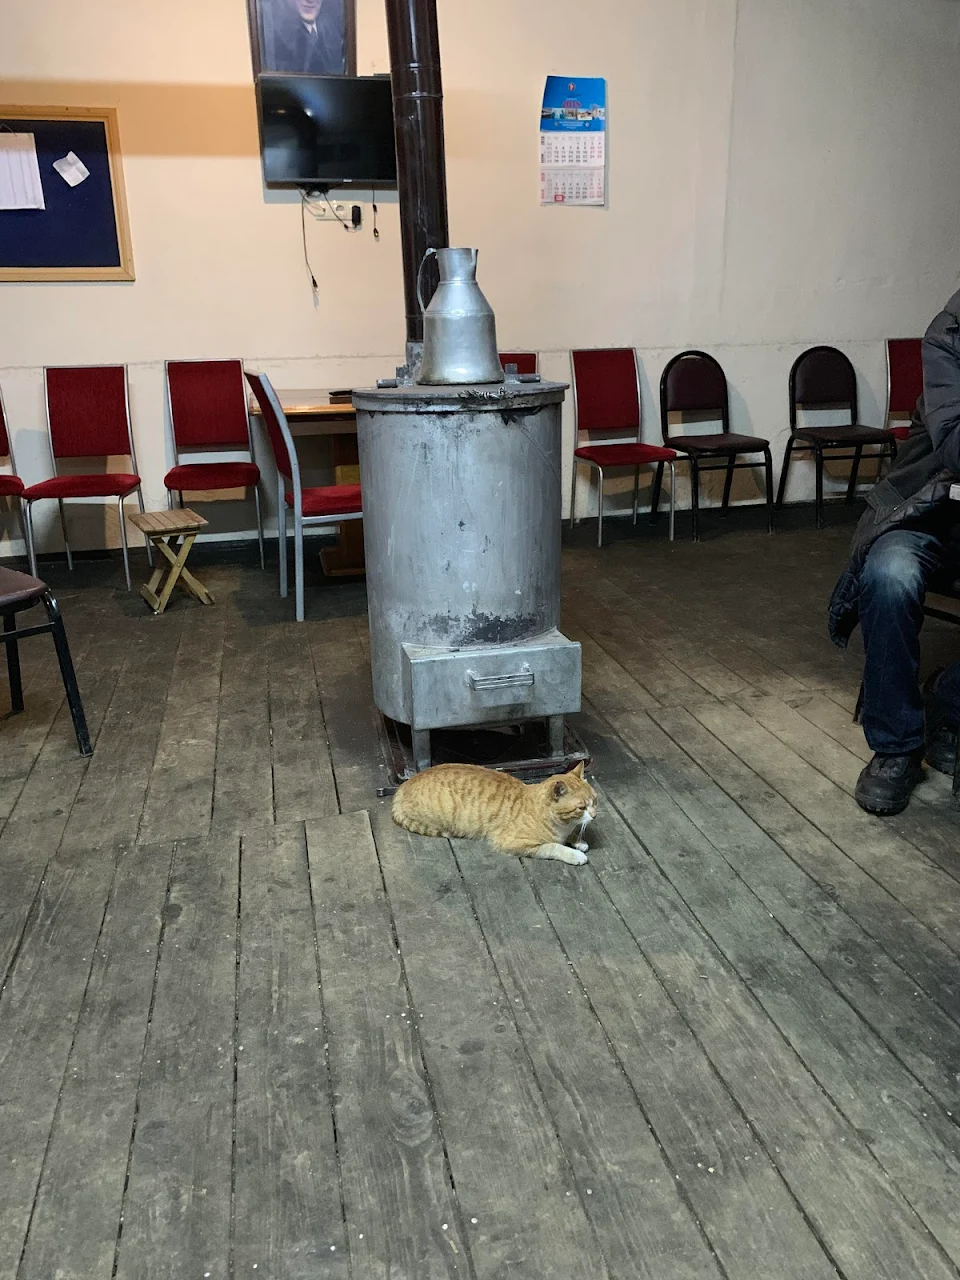 This cat kicking it heavy at the local joint and keeping warm by the stove